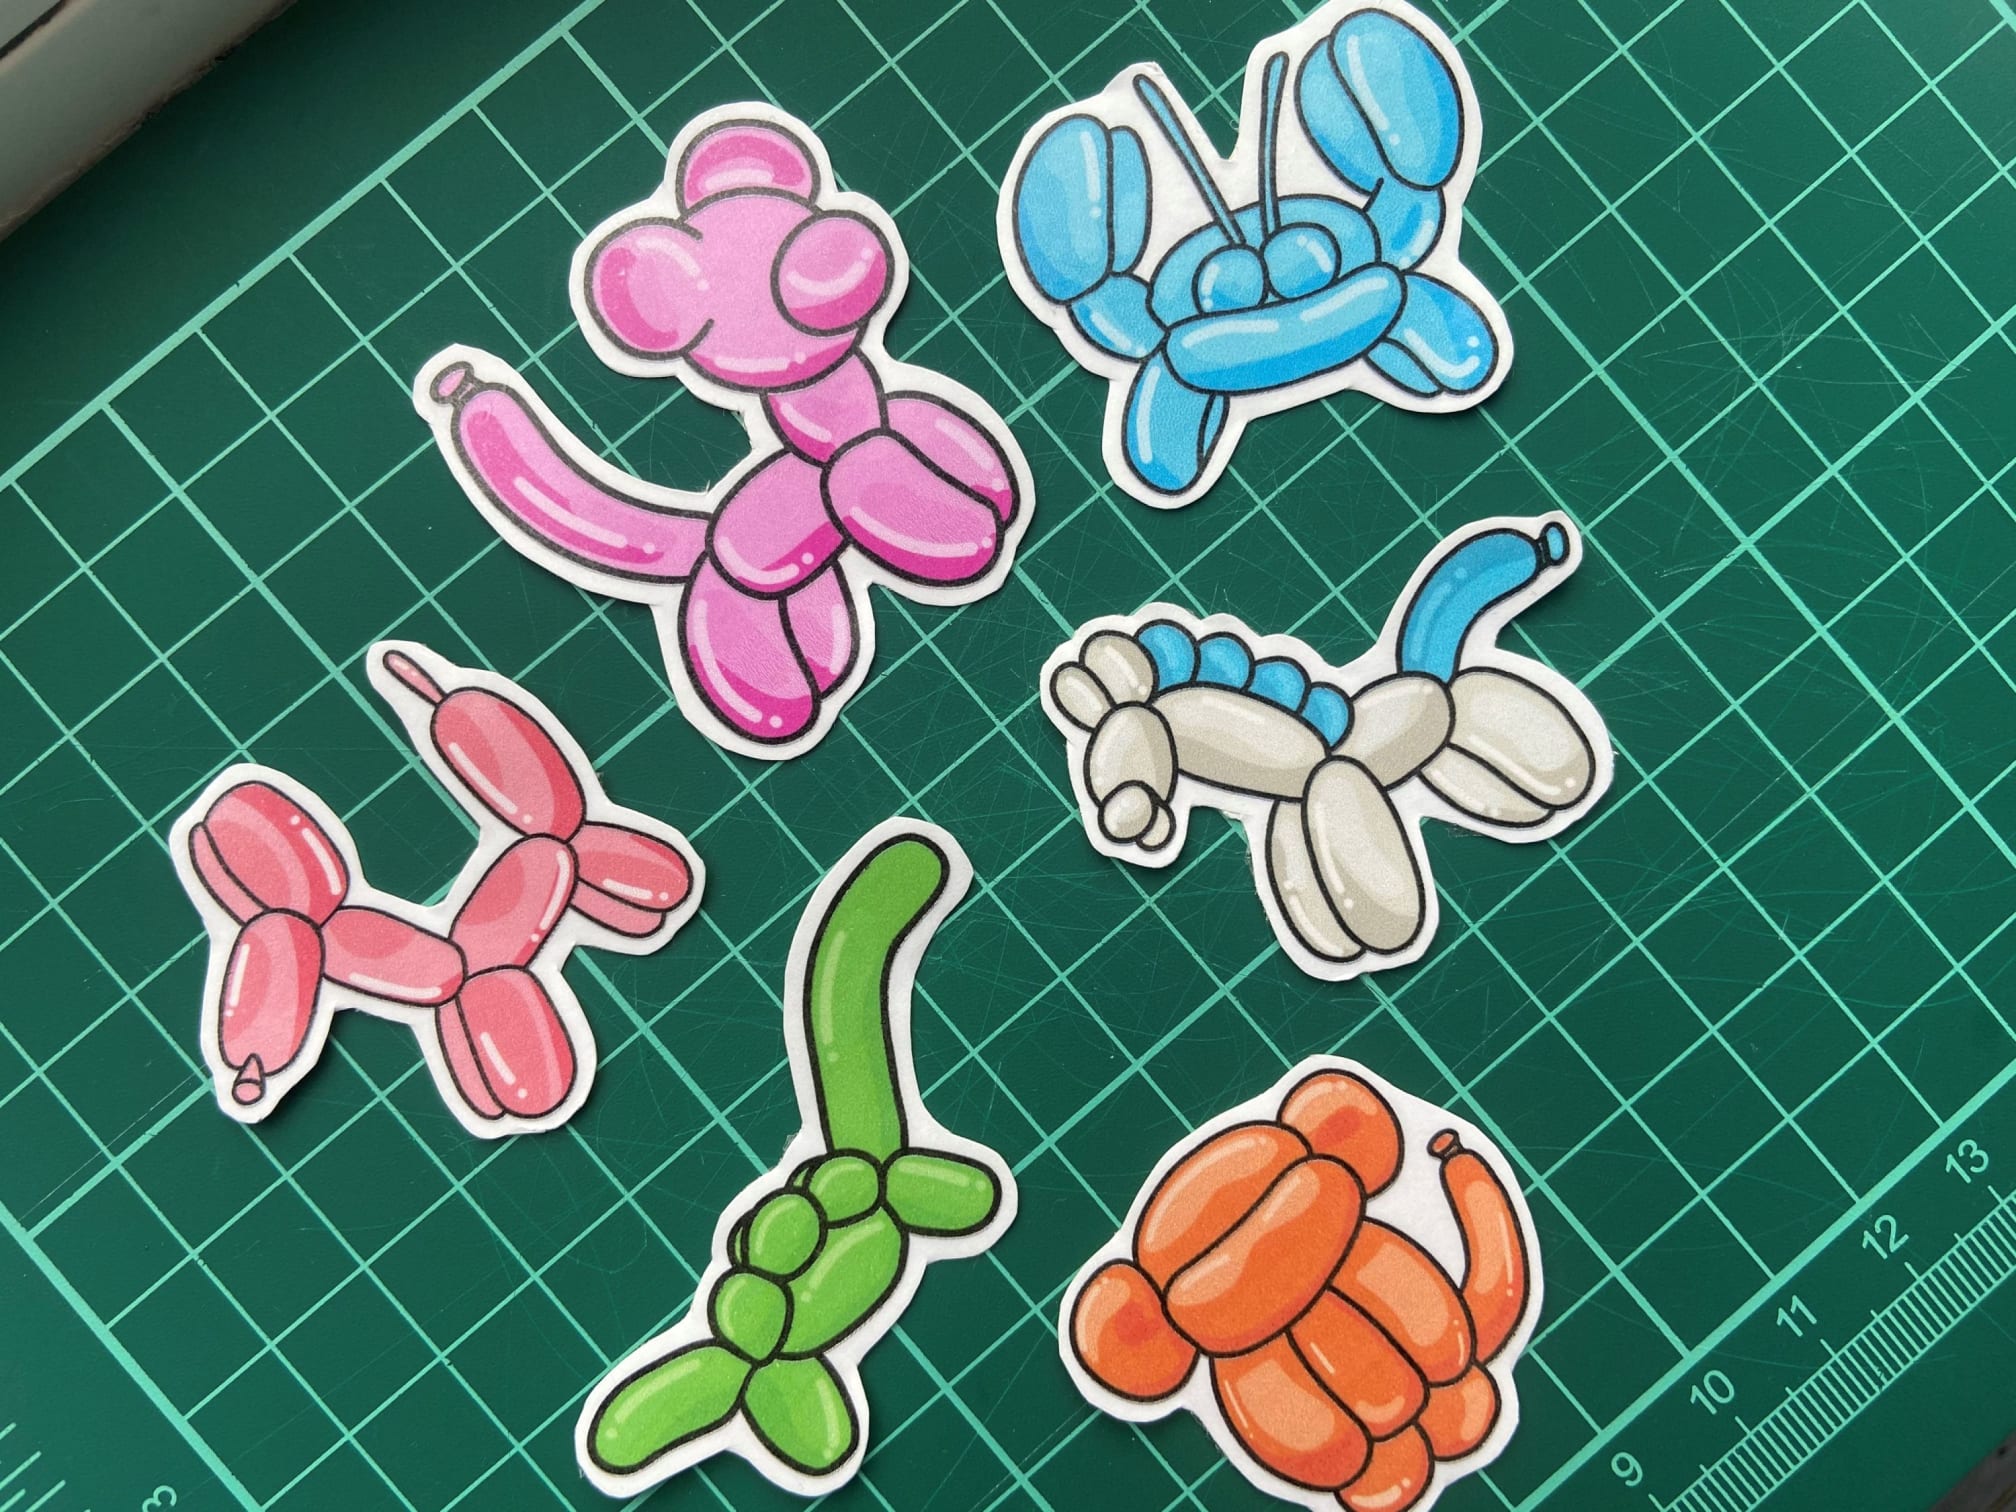 Some colourful handmade stickers of baloon animals